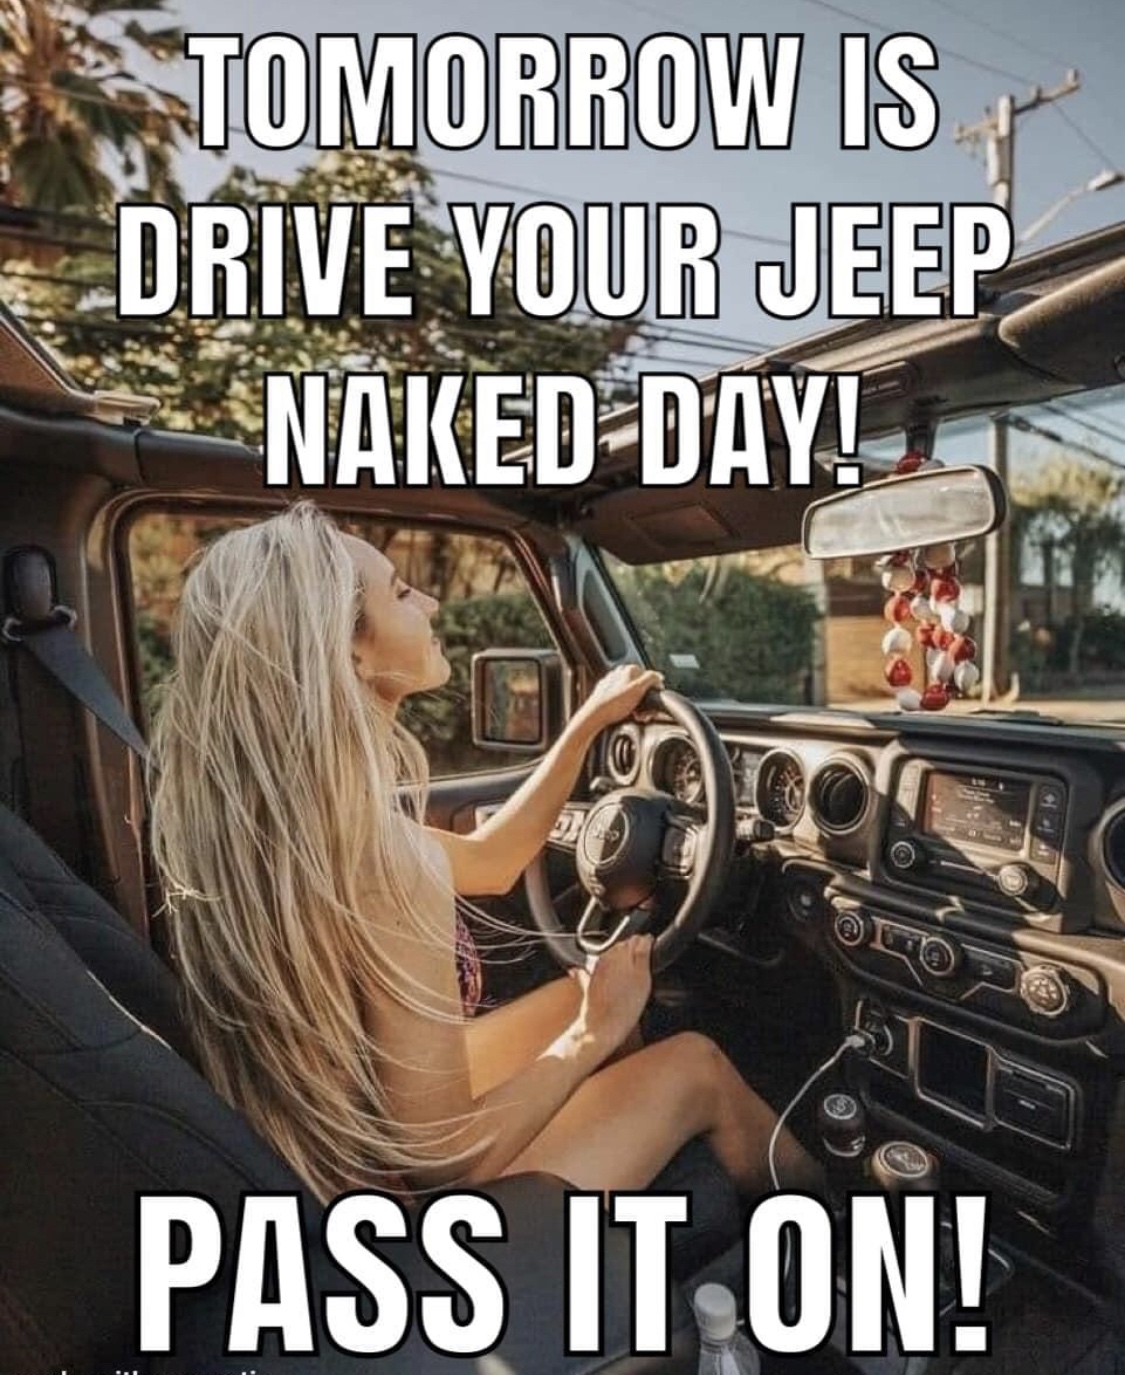 Car - Tomorrow Is Drive Your Jeep Naked Day! he Pass It On!